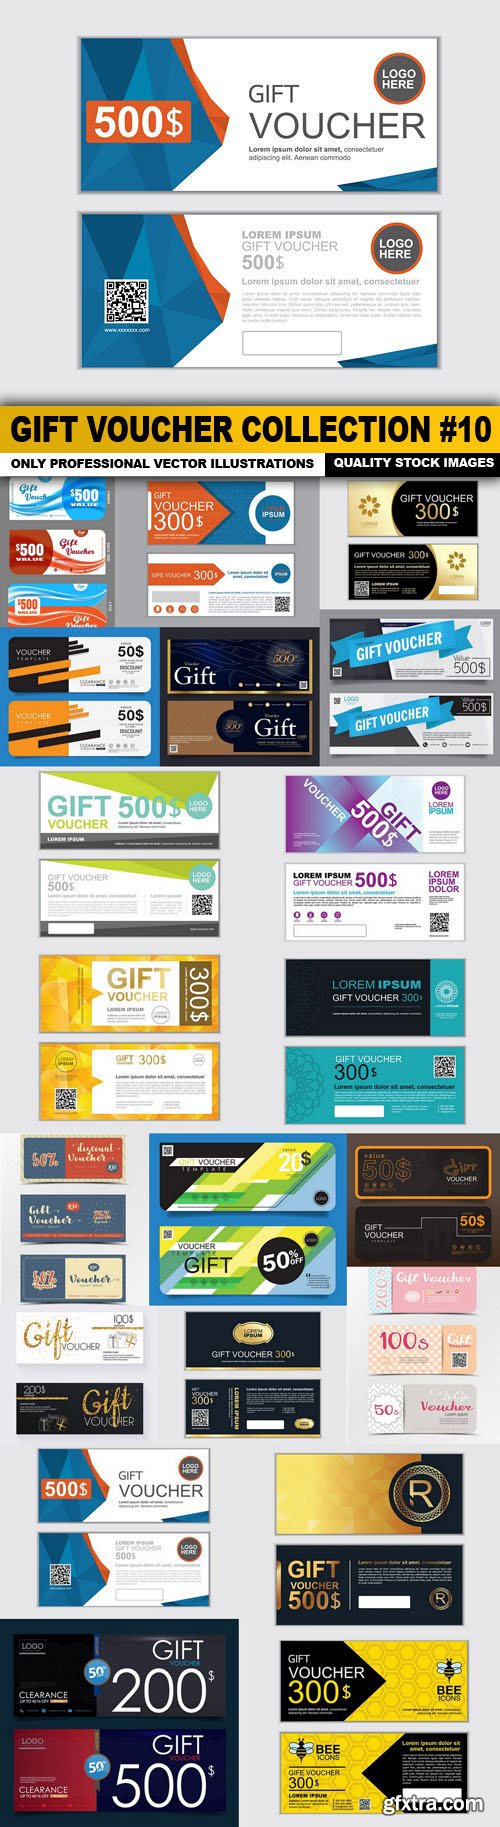 Gift Voucher Collection #10 - 20 Vector